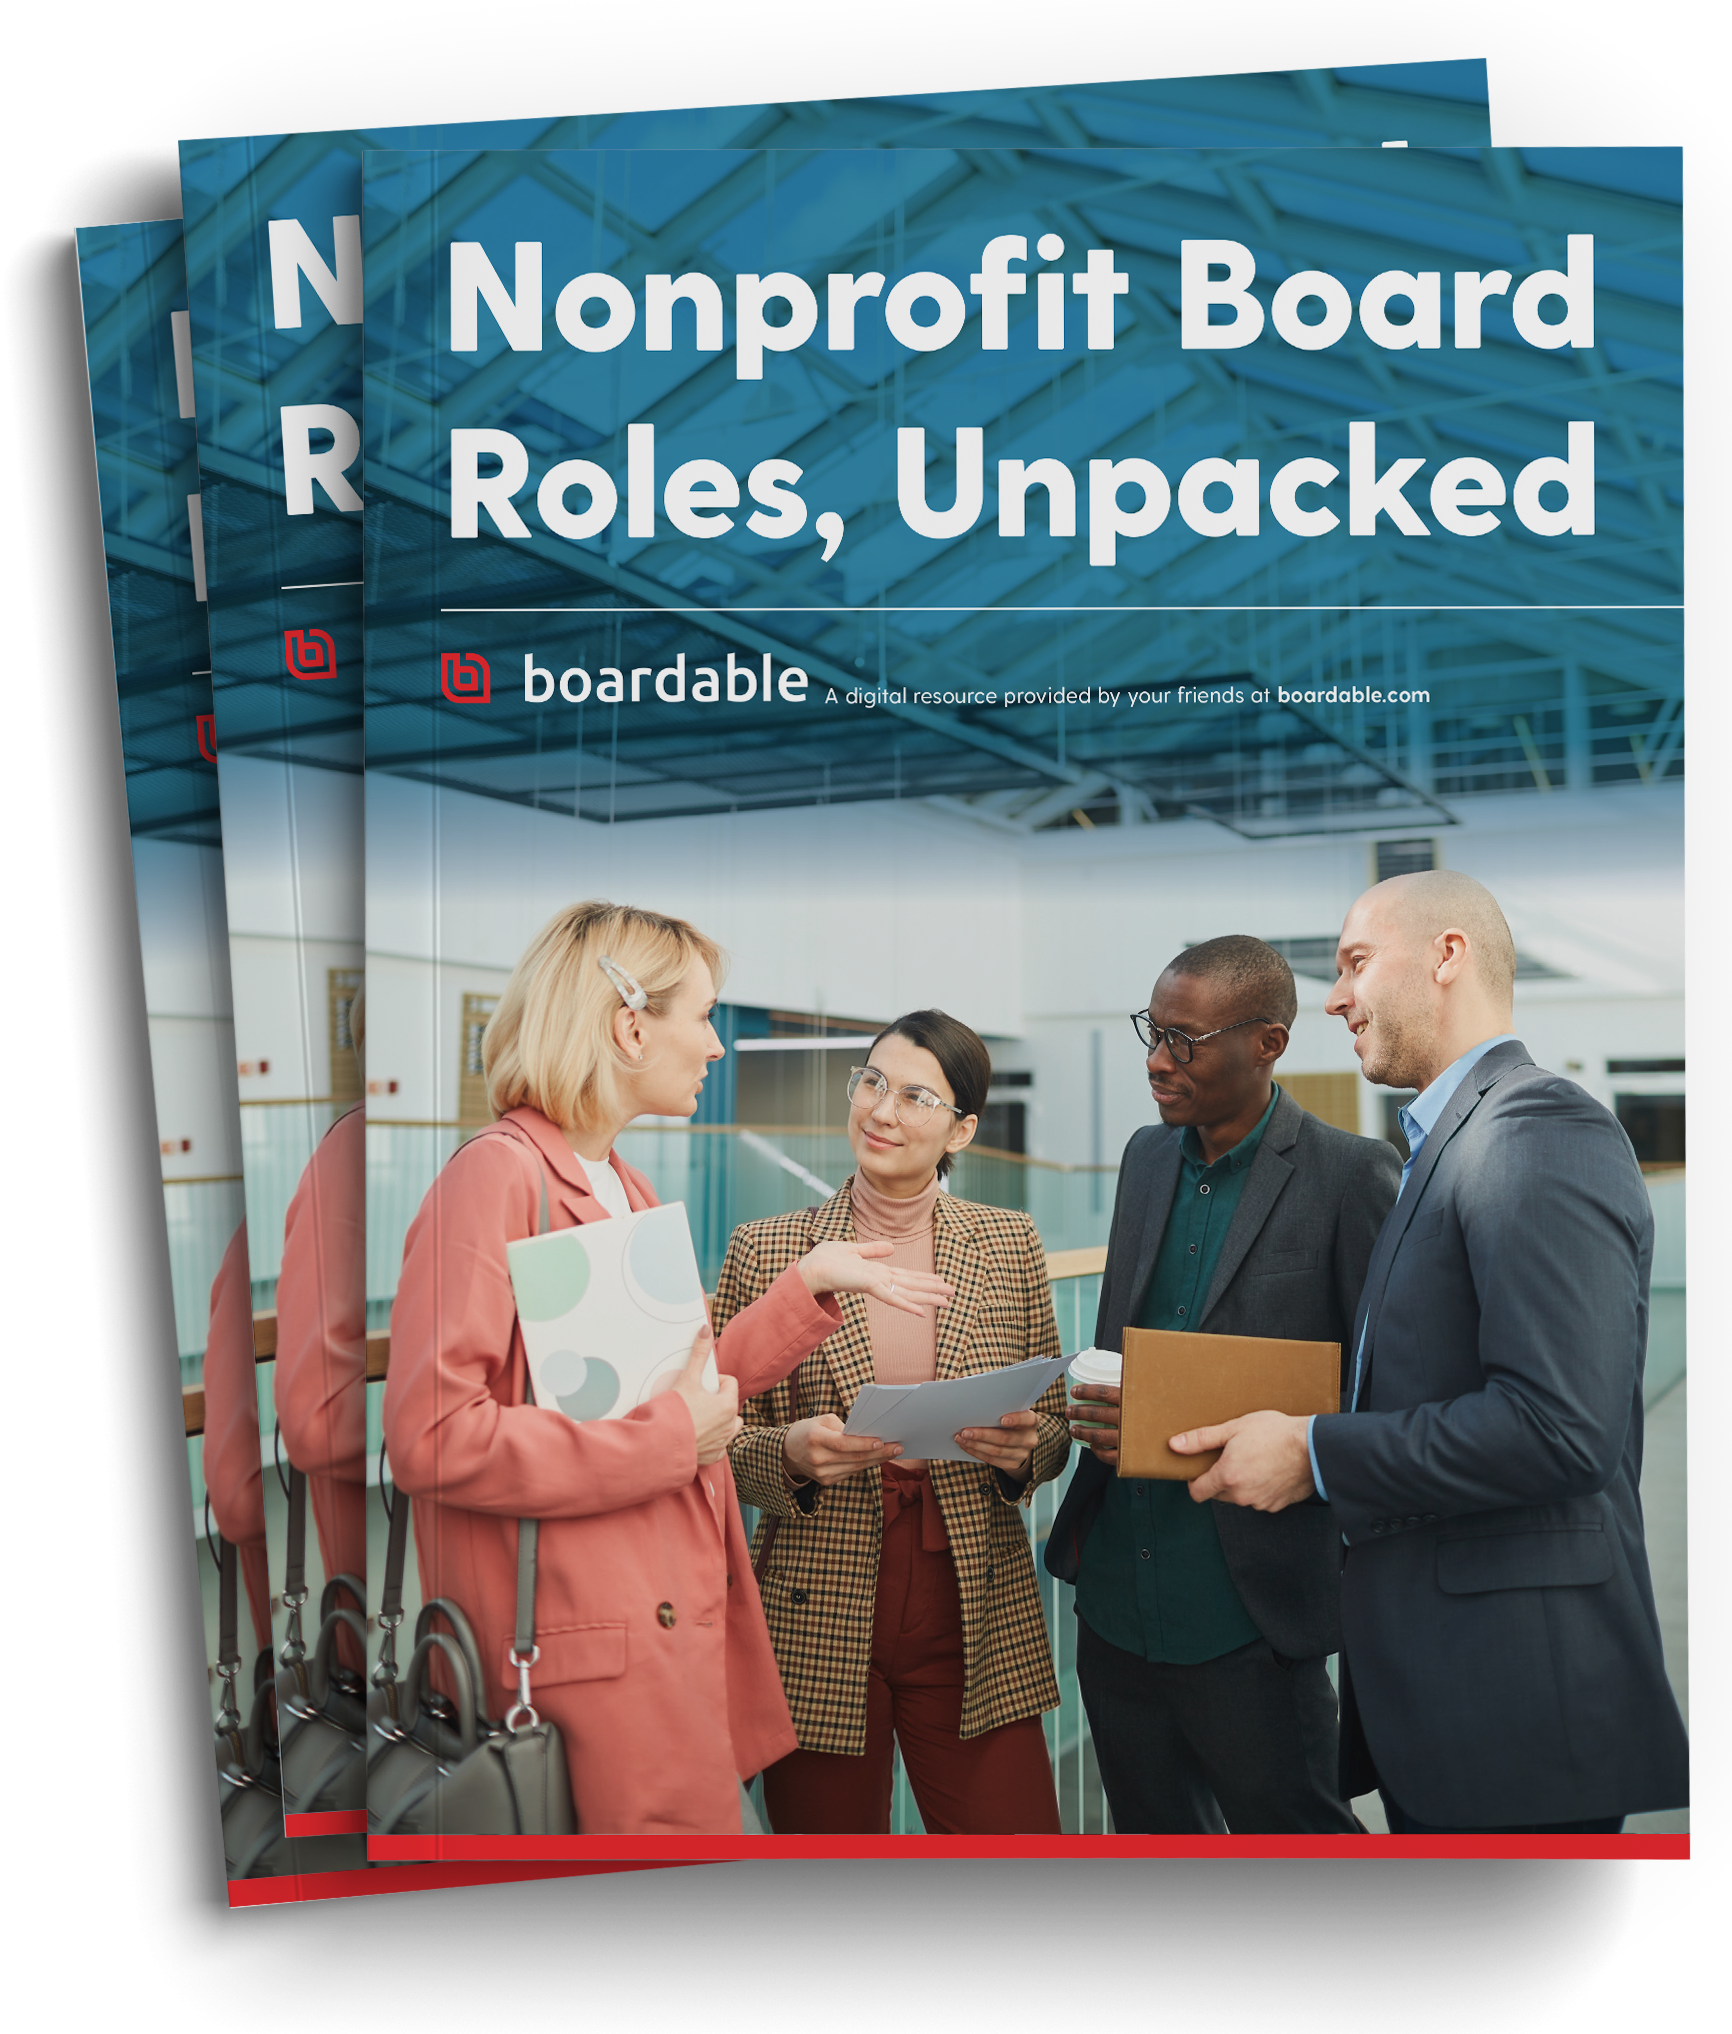 Cover image for free ebook from Boardable, "Nonprofit Board Roles, Unpacked."